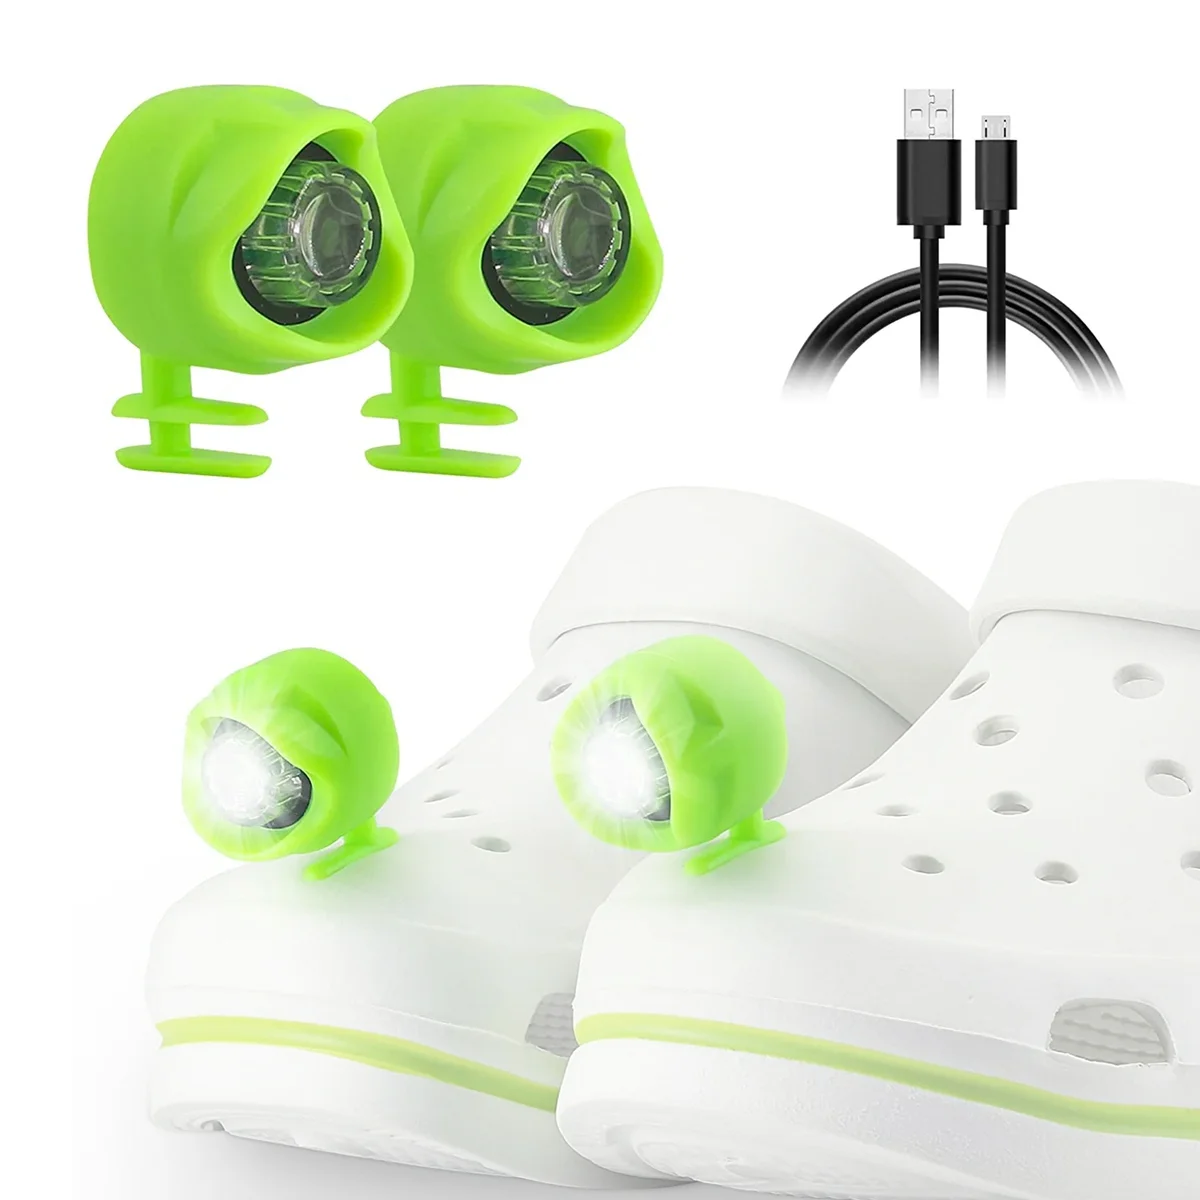 

2 Pcs Rechargeable Clogs Shoe Light,Headlights for Croc 3 Lighting Modes in the Dark,For Dog Walking, Camping,Green